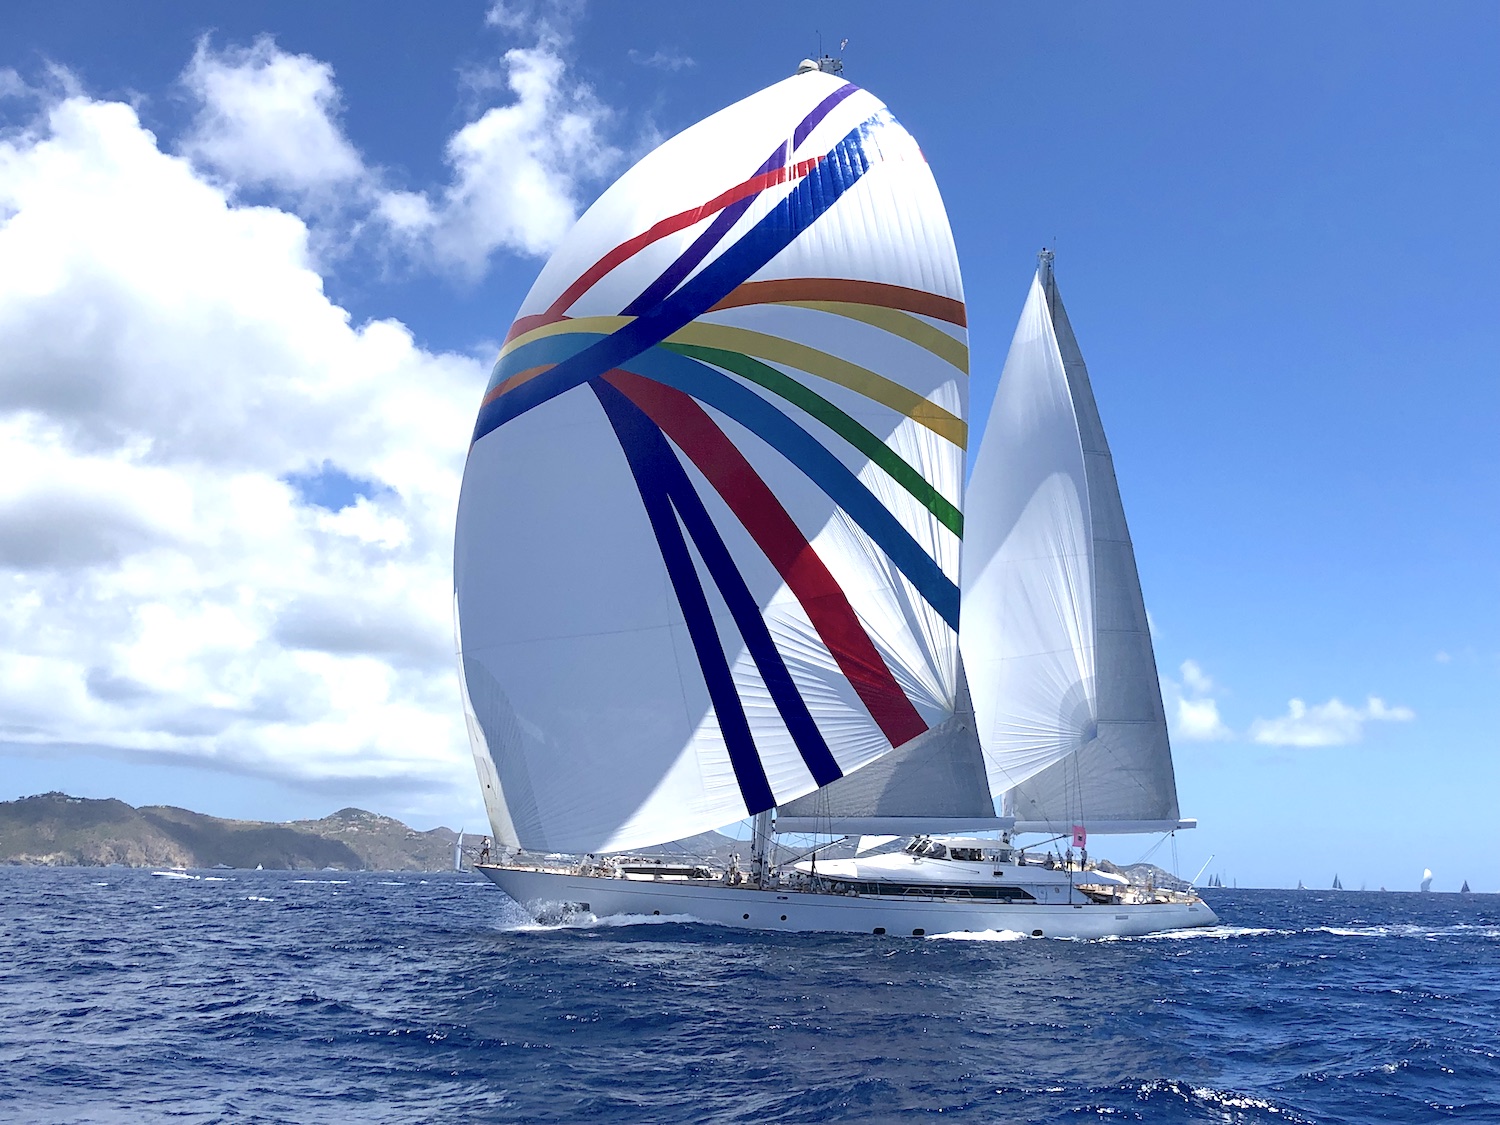 Sailing Yacht Rosehearty at St Barths Bucket 2019 this Ron Holland Design yacht took the first place in her series, winning all races, photo by Jim Connolly